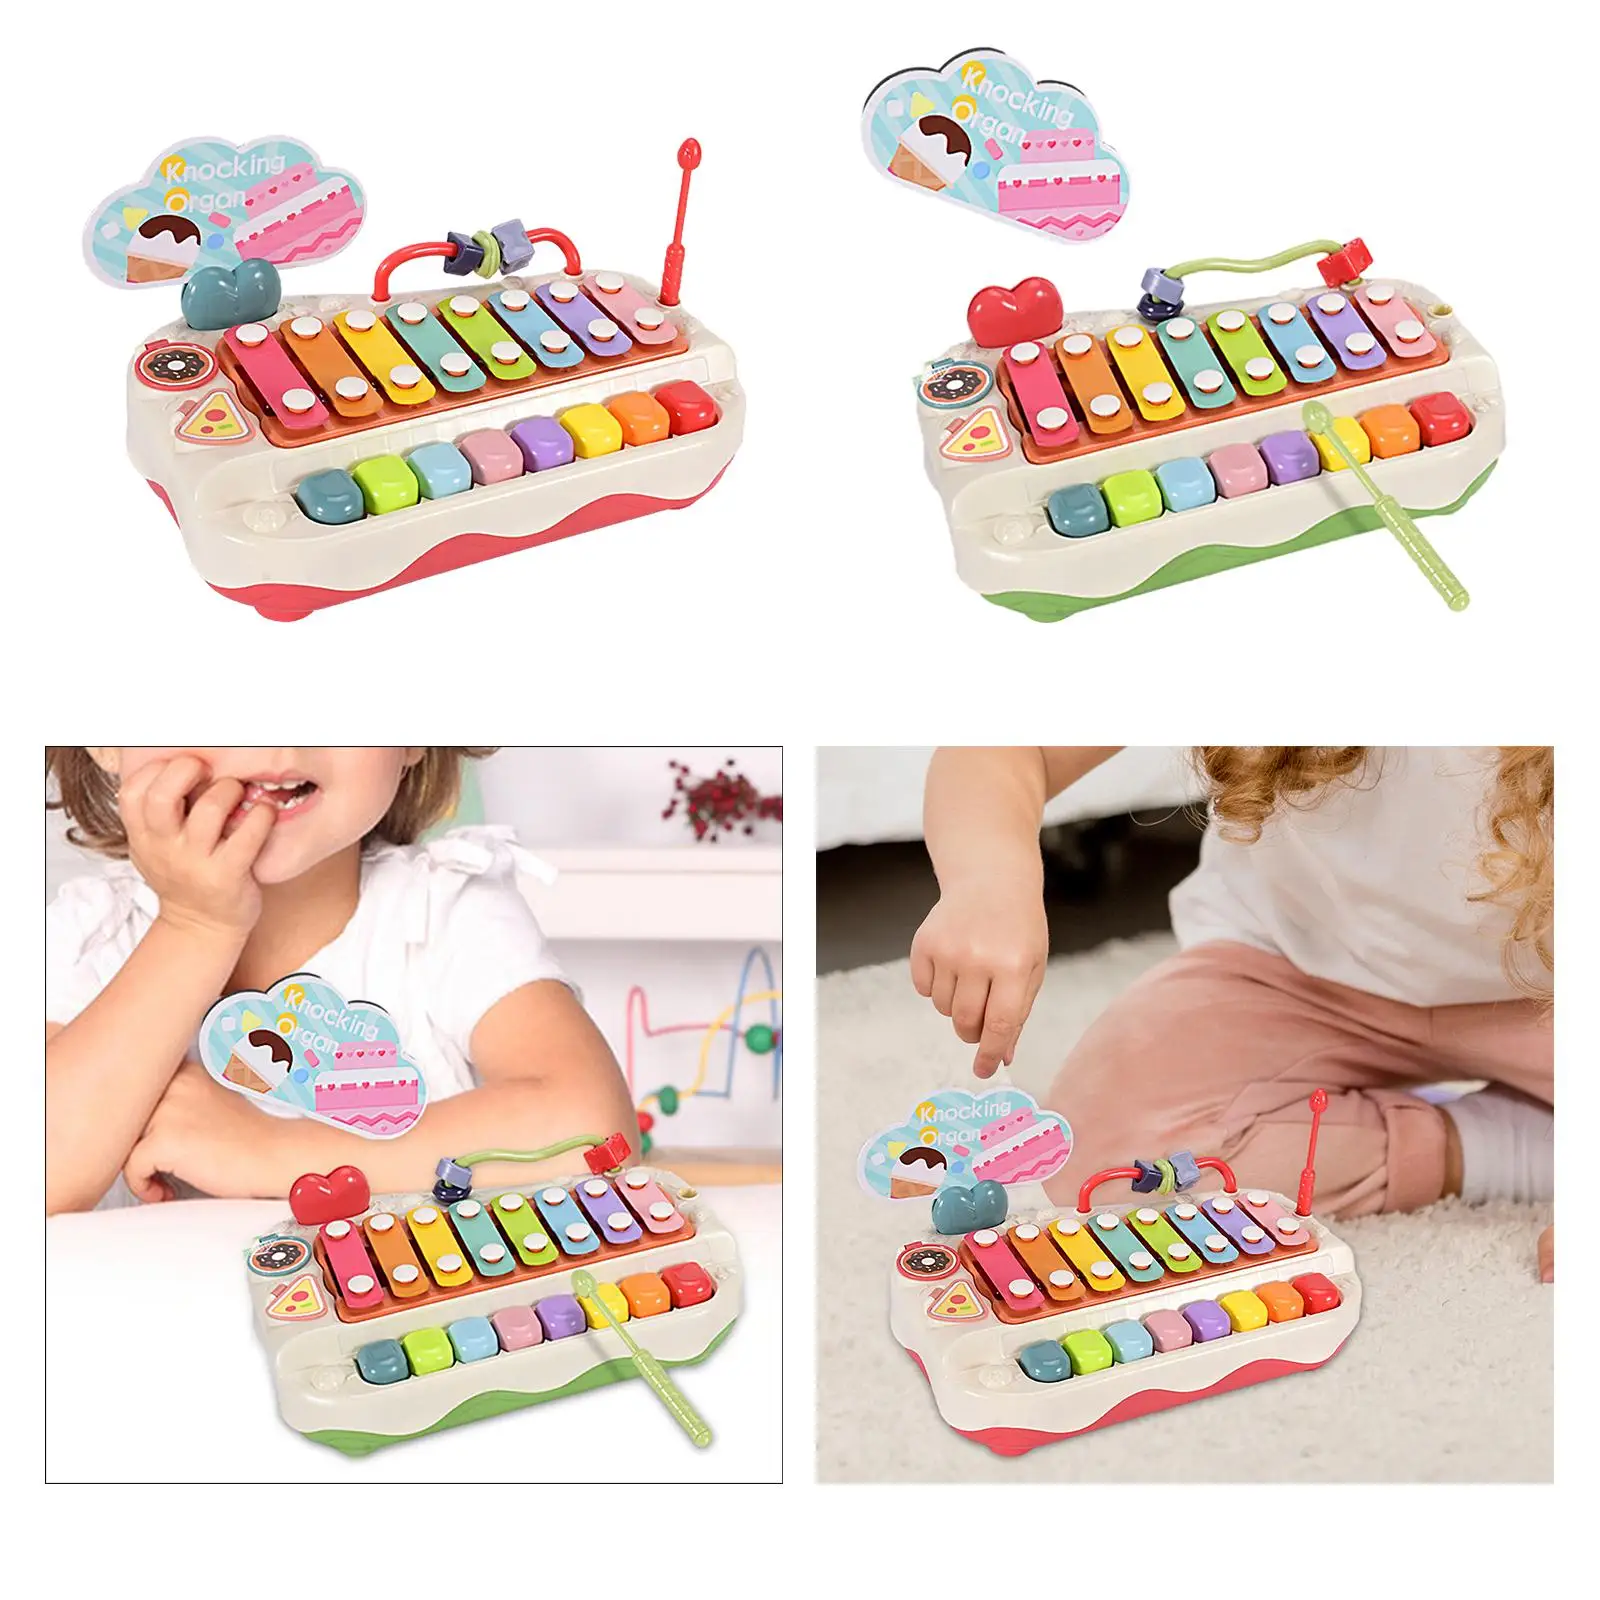 Kids Musical Toy Hammering Pounding Toys Motor Skills Montessori Multicolored Hand Knocking Piano for 1 2 3 Years Old Kids